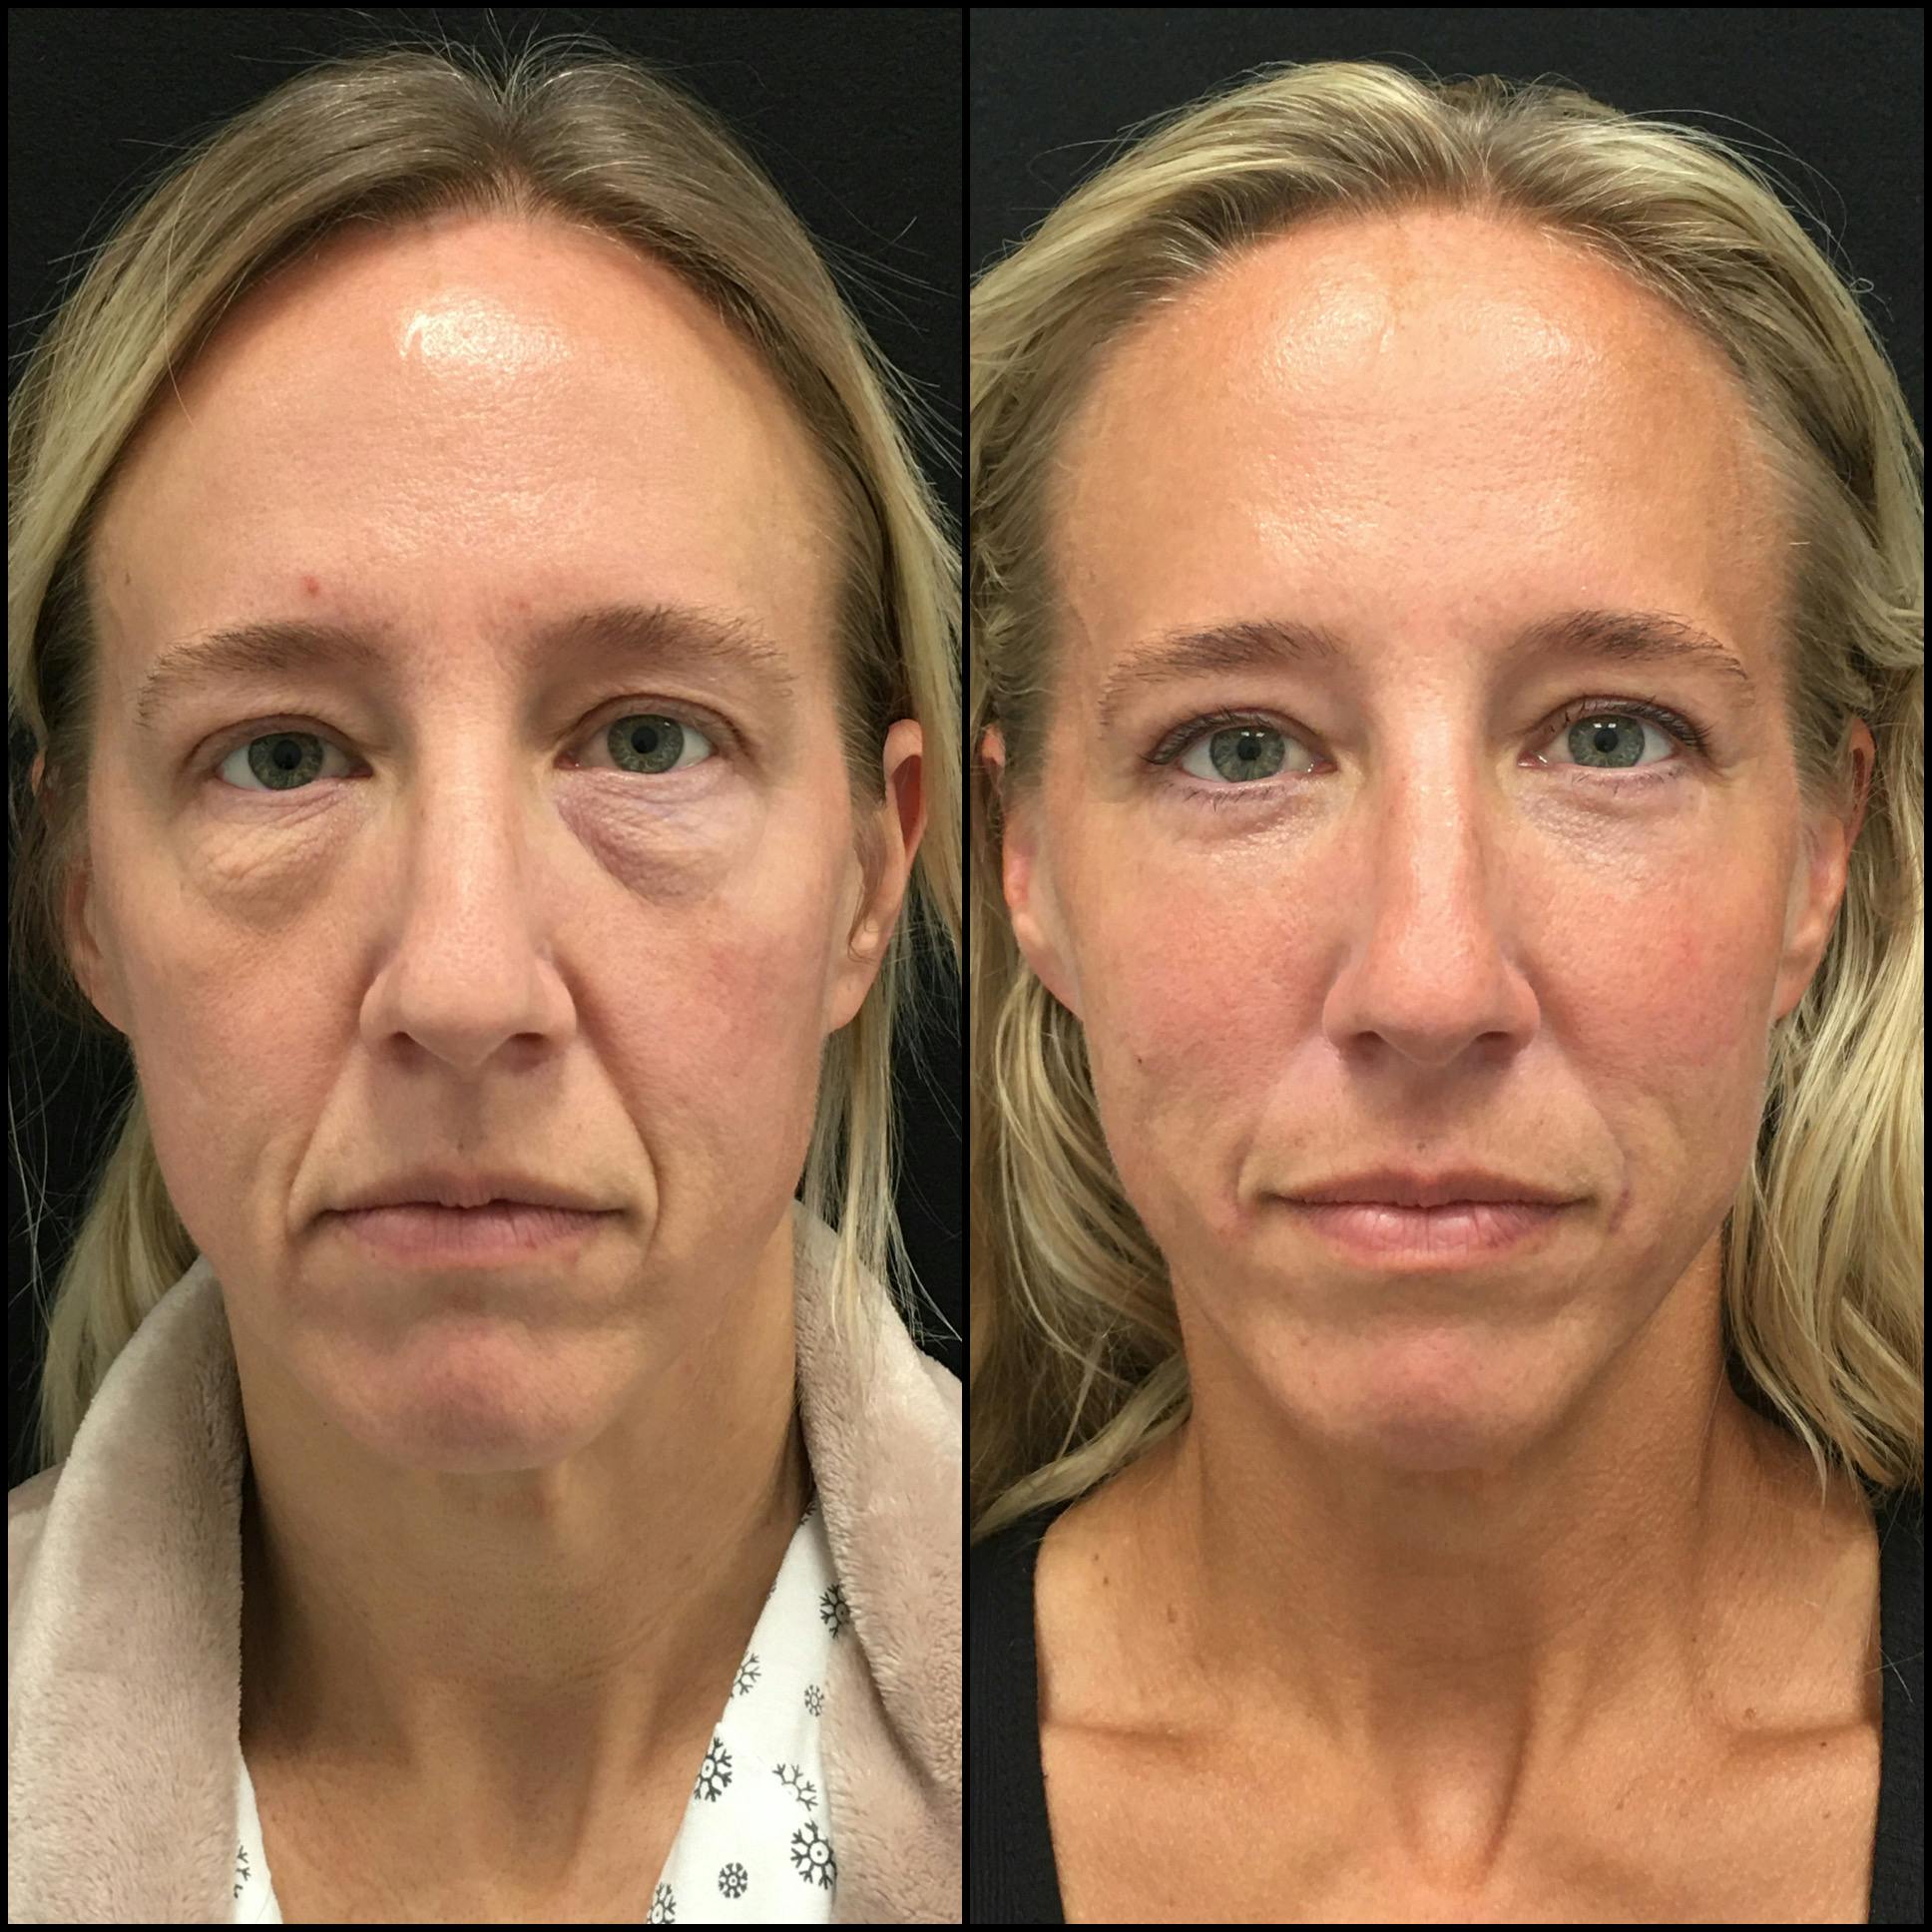 Lower Blepharoplasty Before & After Photos